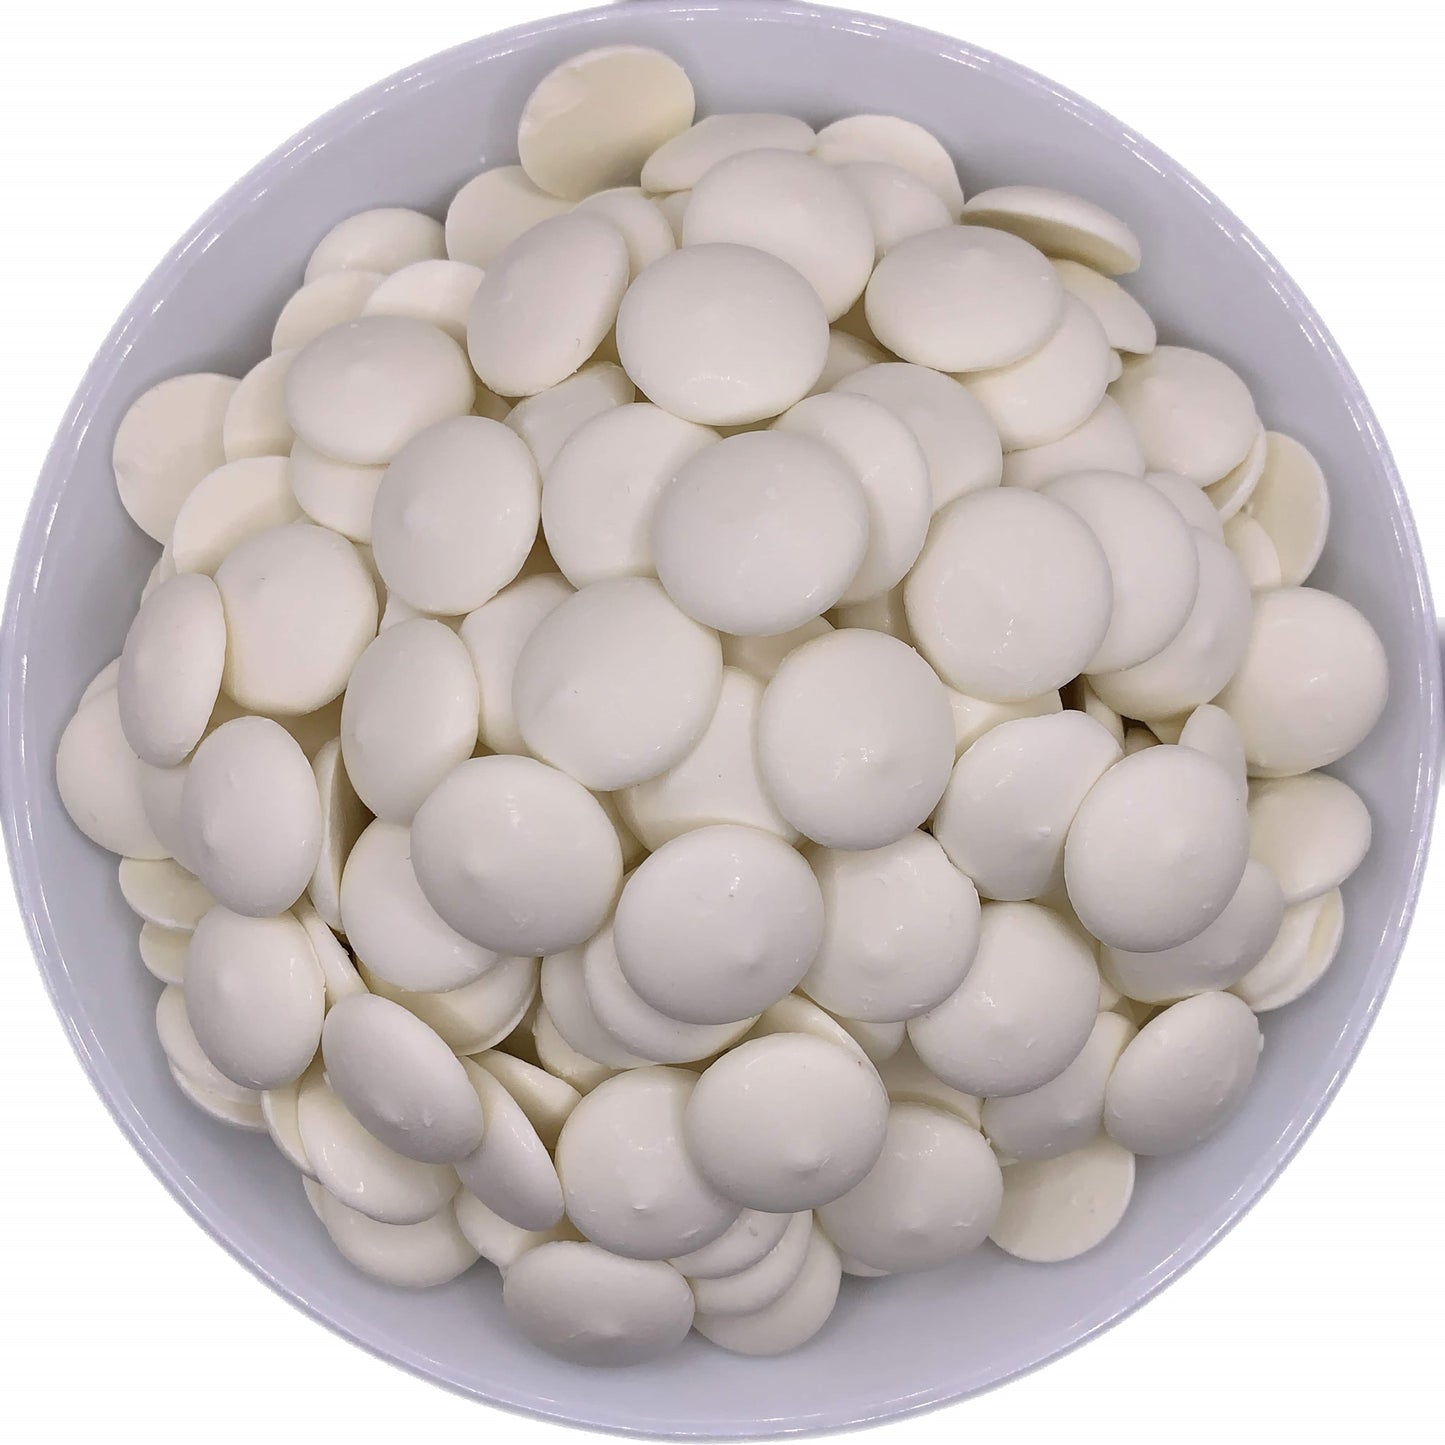 A white bowl brimming with Merckens Super White Chocolate Melting Wafers, offering a bright white hue perfect for custom confectionery designs and chocolate fountains.